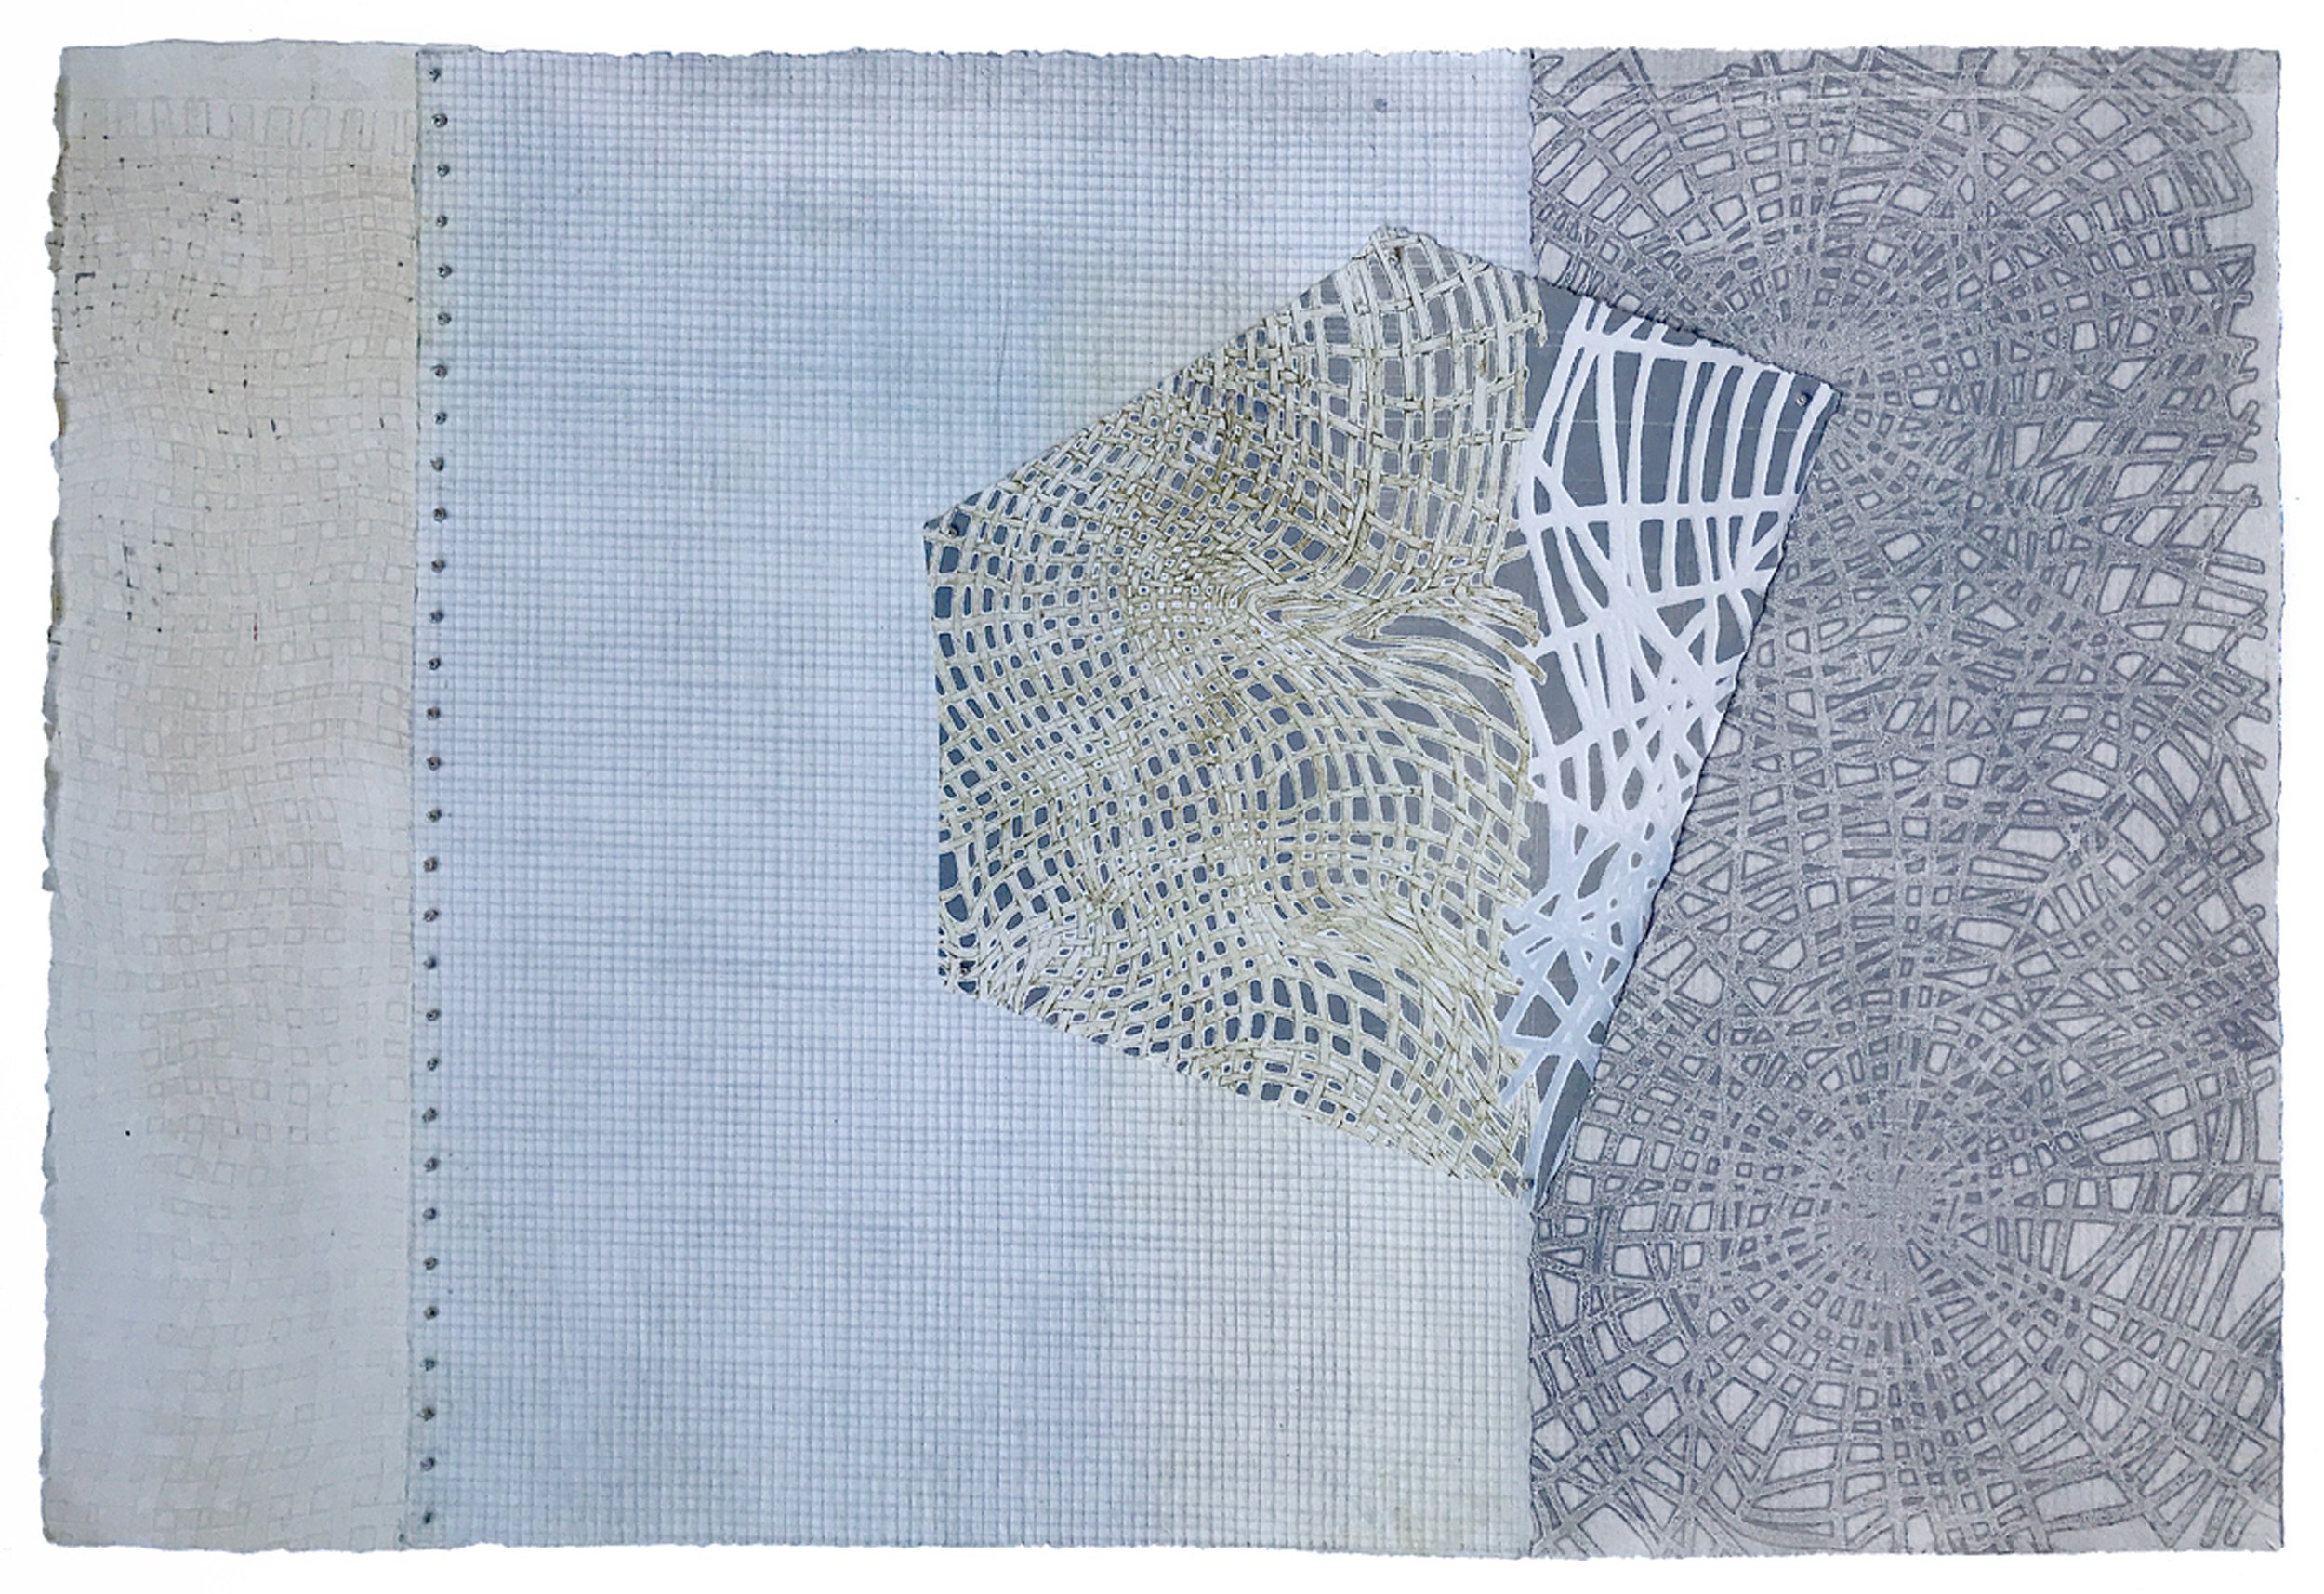  Gwen Partin    Weave Diptych IV    Monotype, collagraph, embroidery, collage 